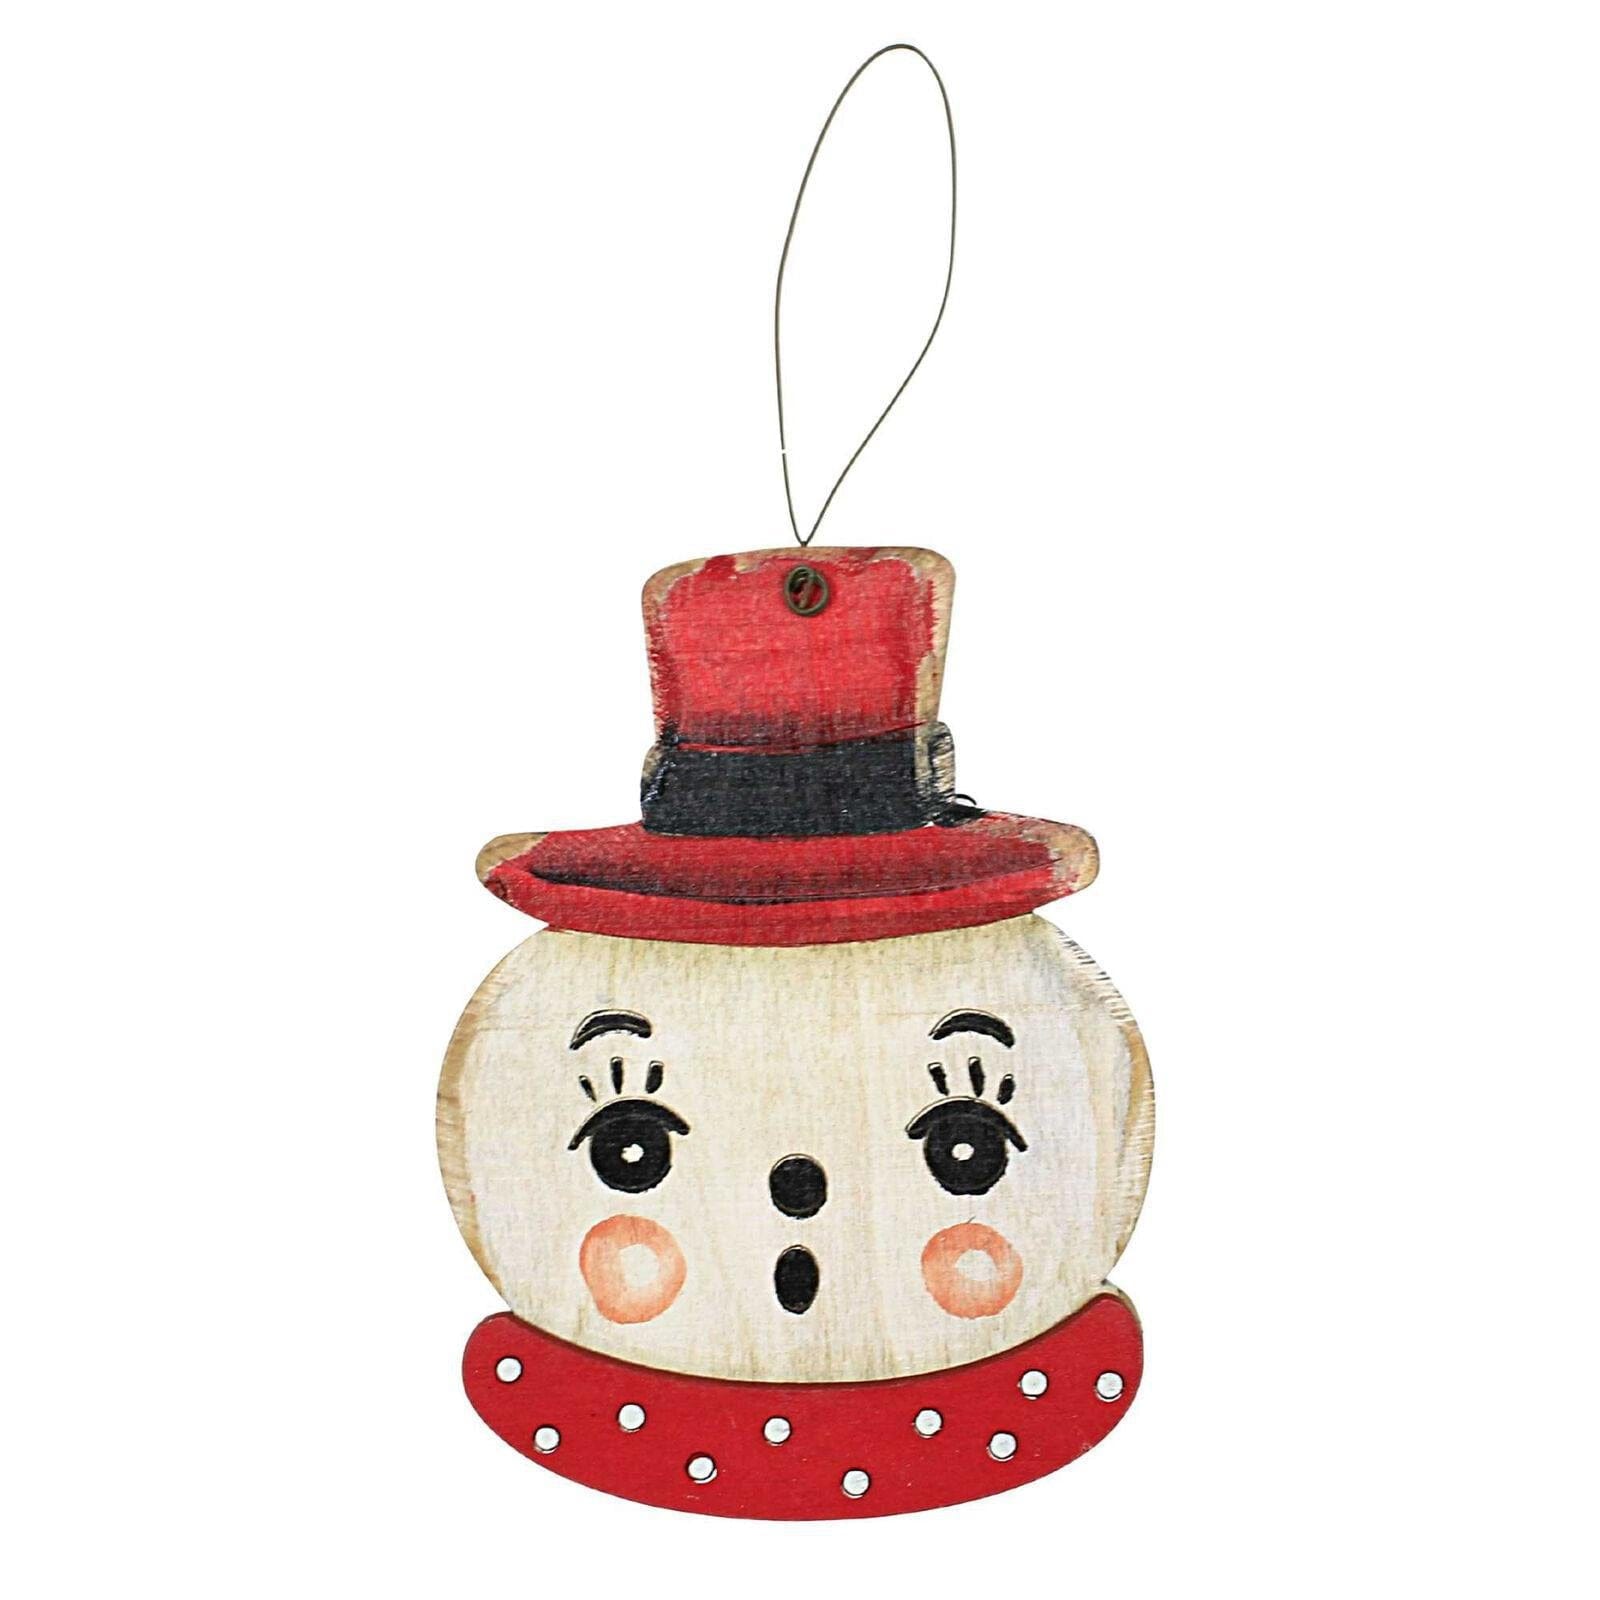 The Owl Box Snowman red hat Johanna Parker Christmas Character Ornament